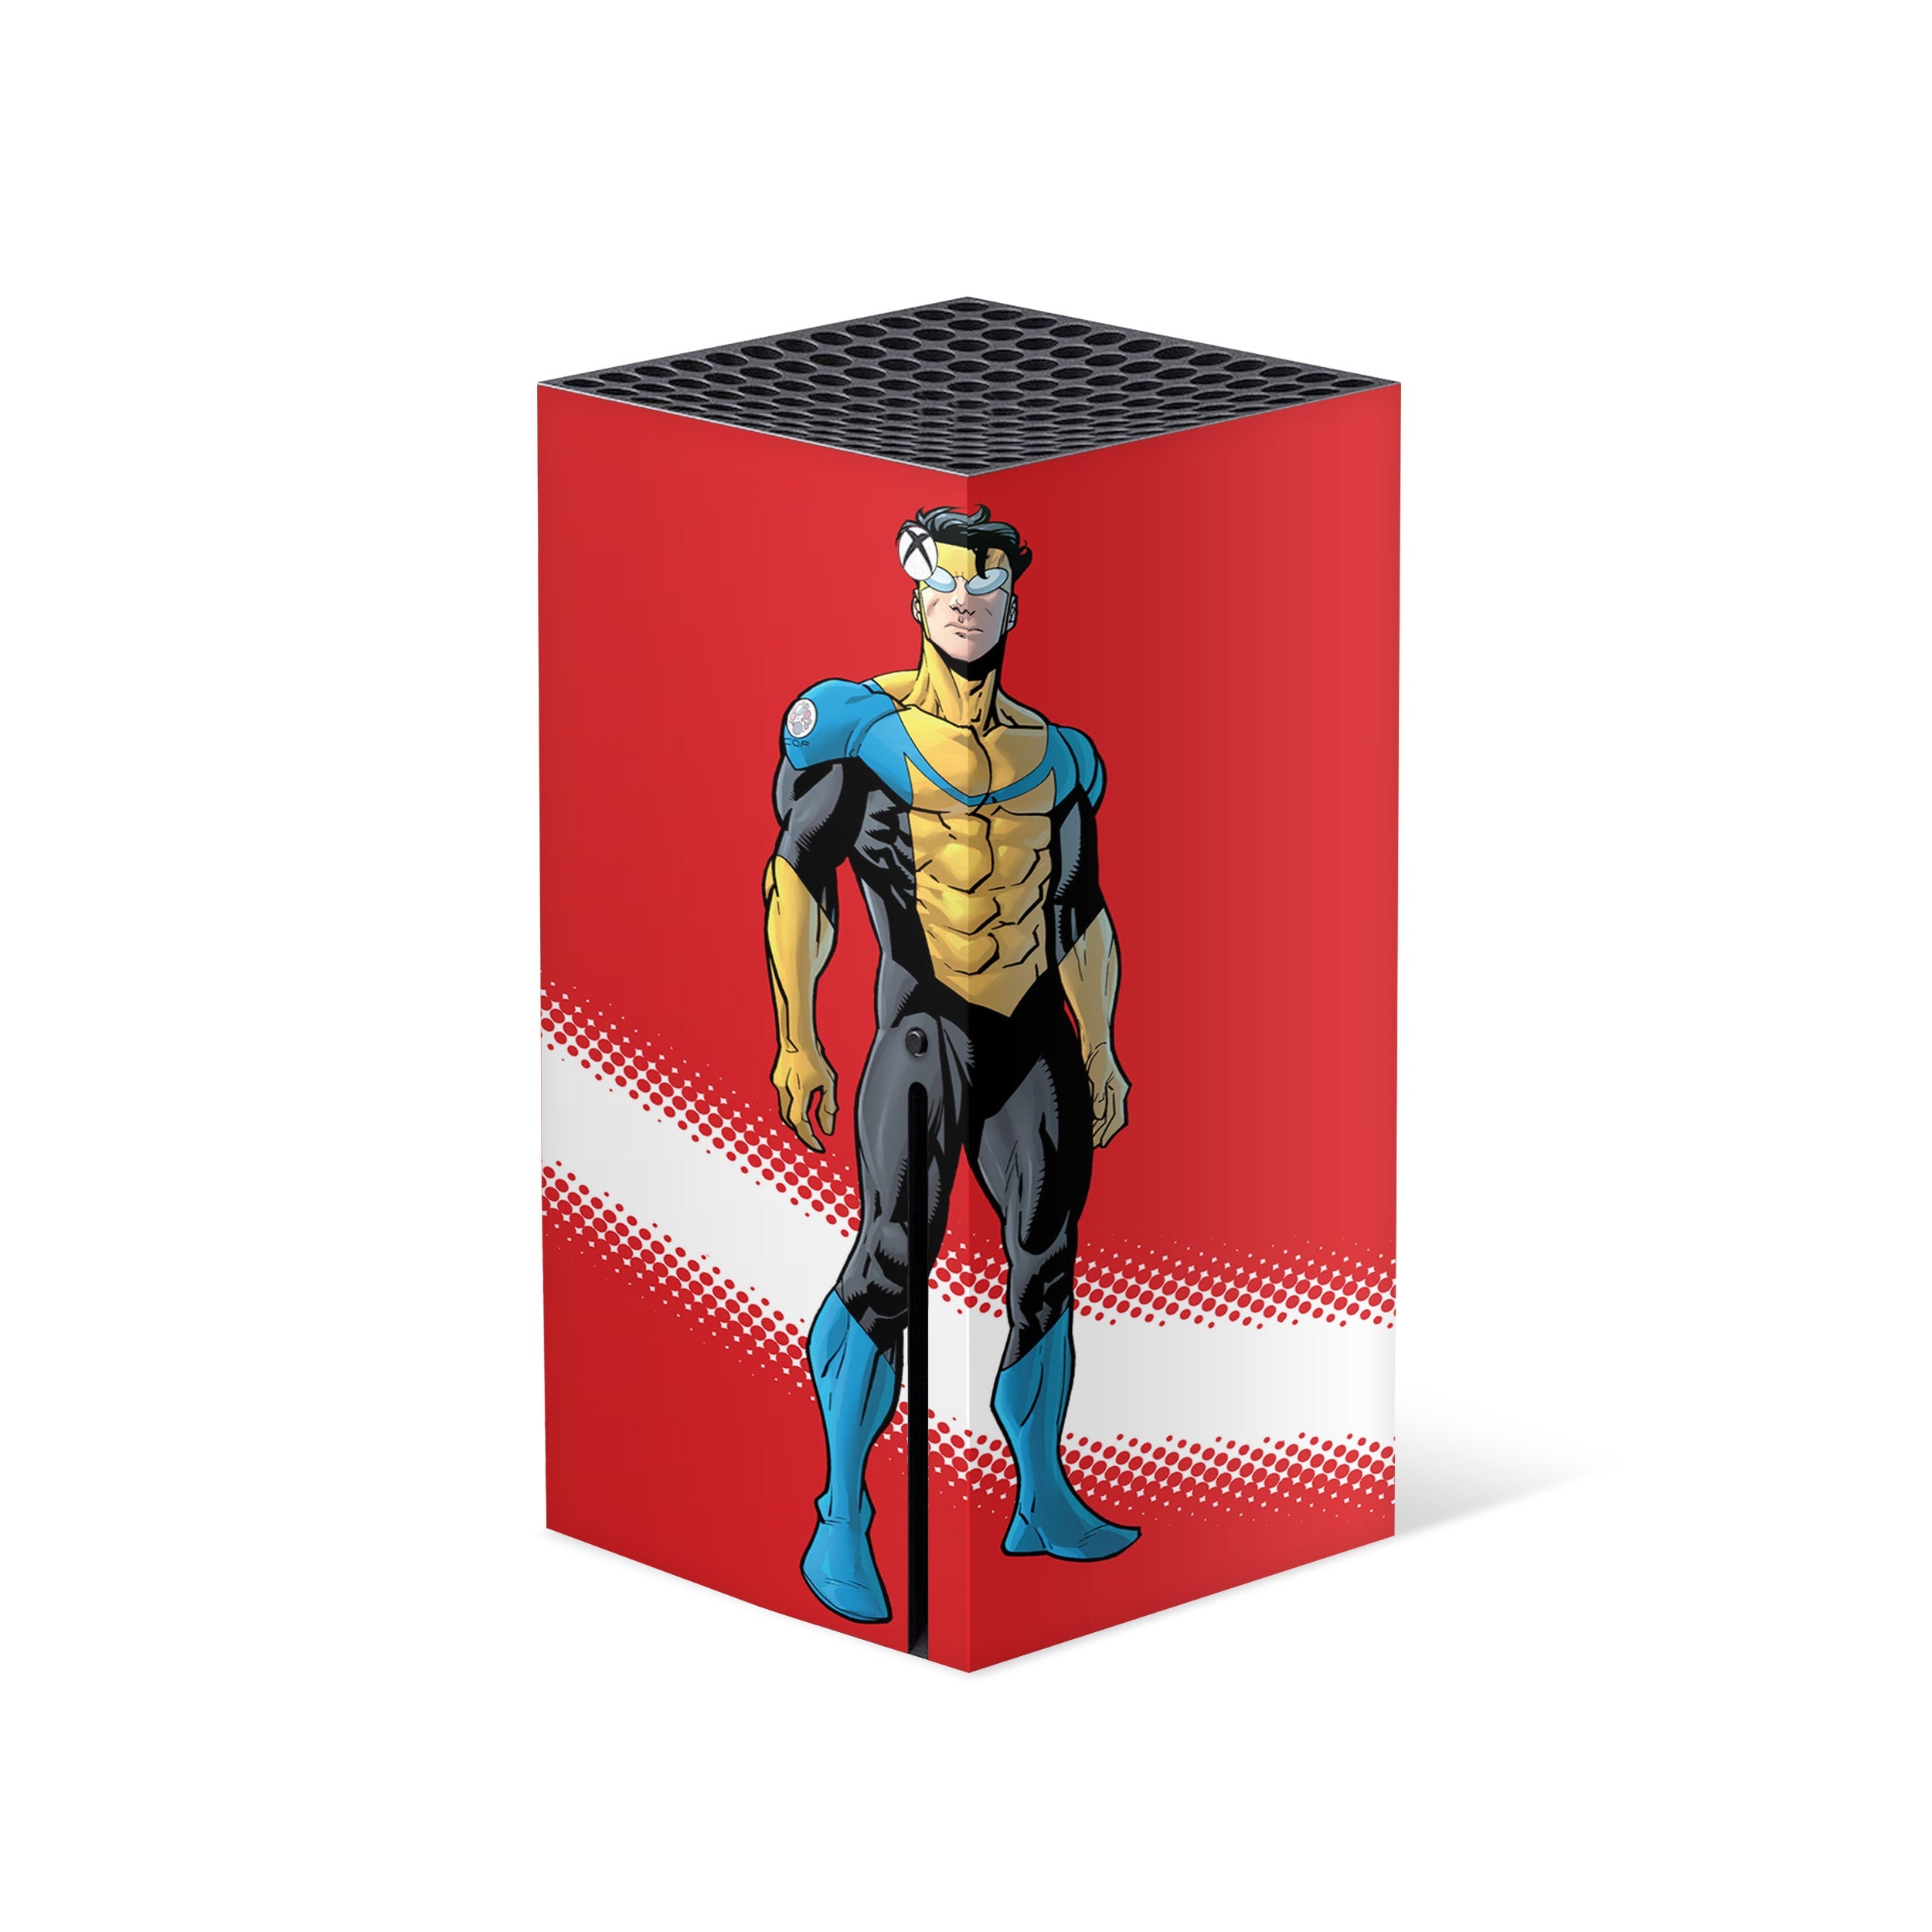 A video game skin featuring a Image Comics Invincible Invincible design for the Xbox Series X.